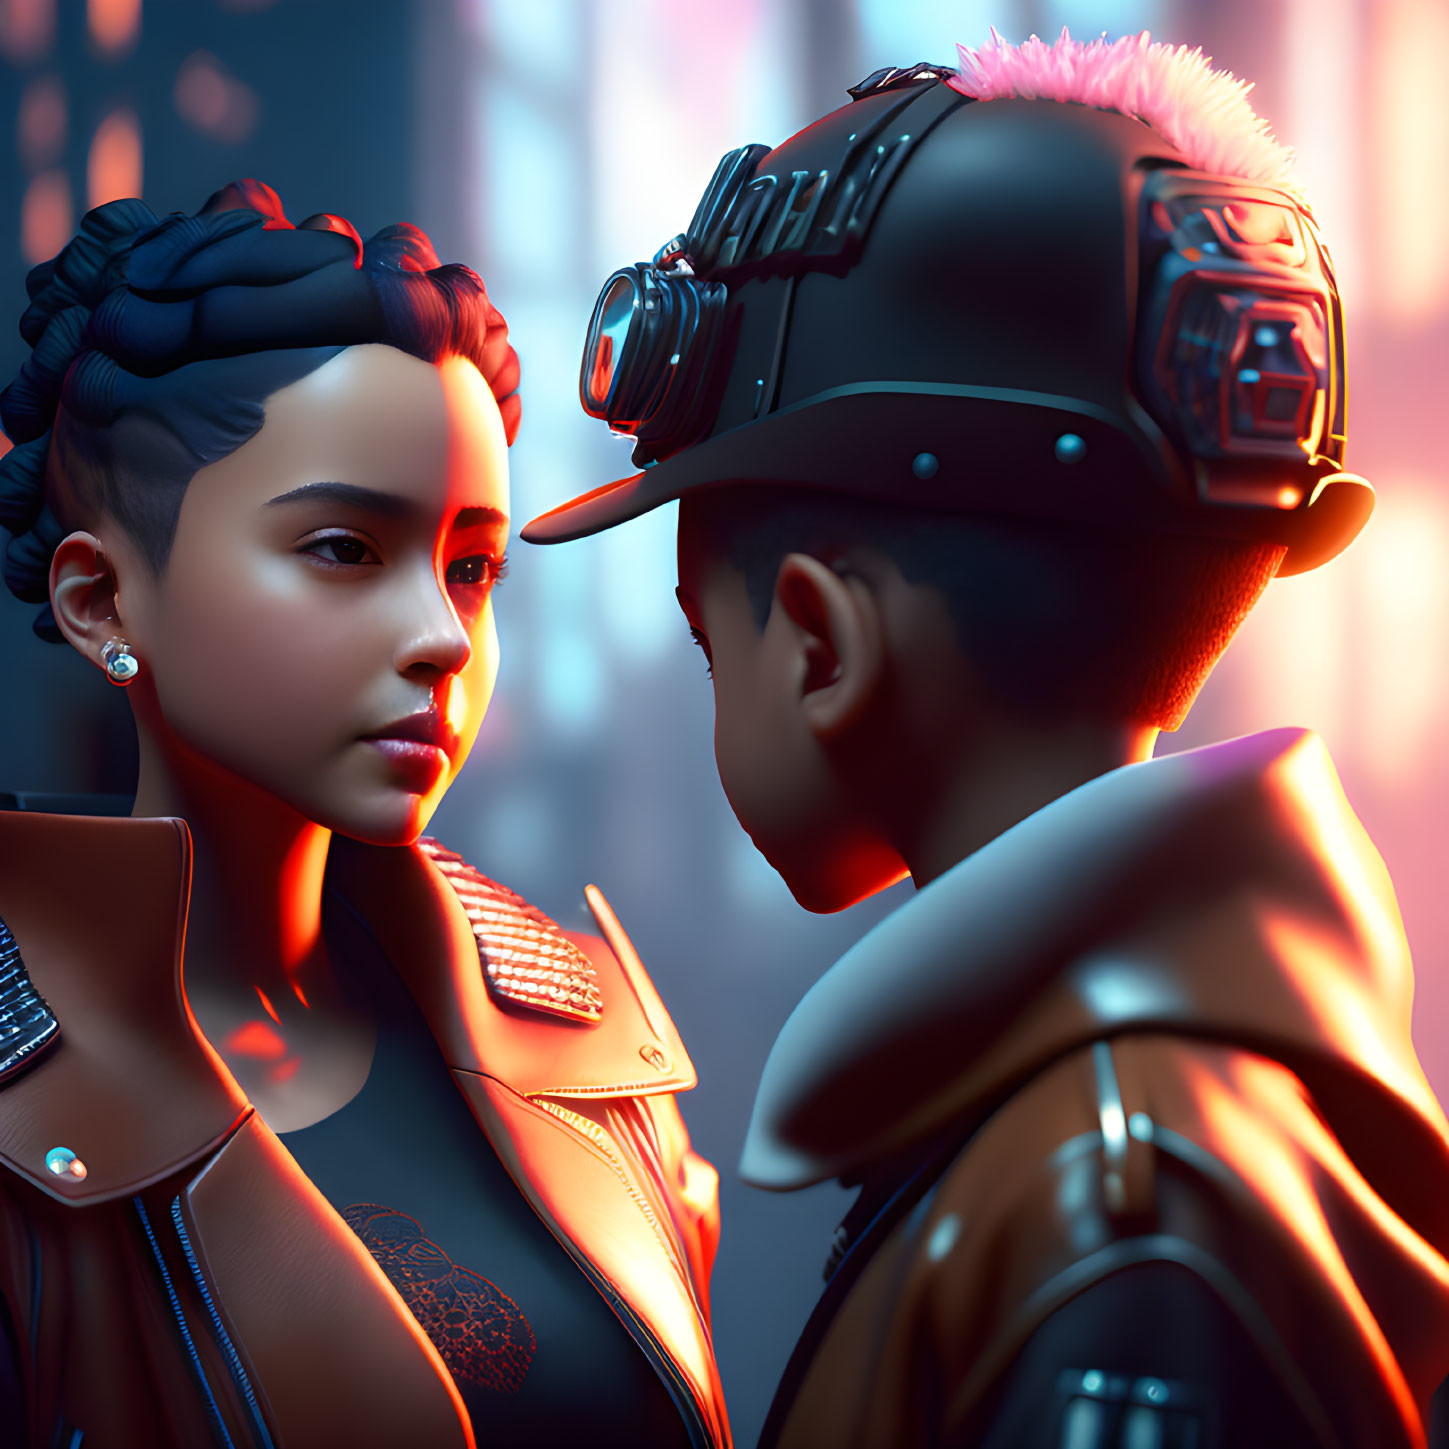 Futuristic stylized characters in neon-lit setting